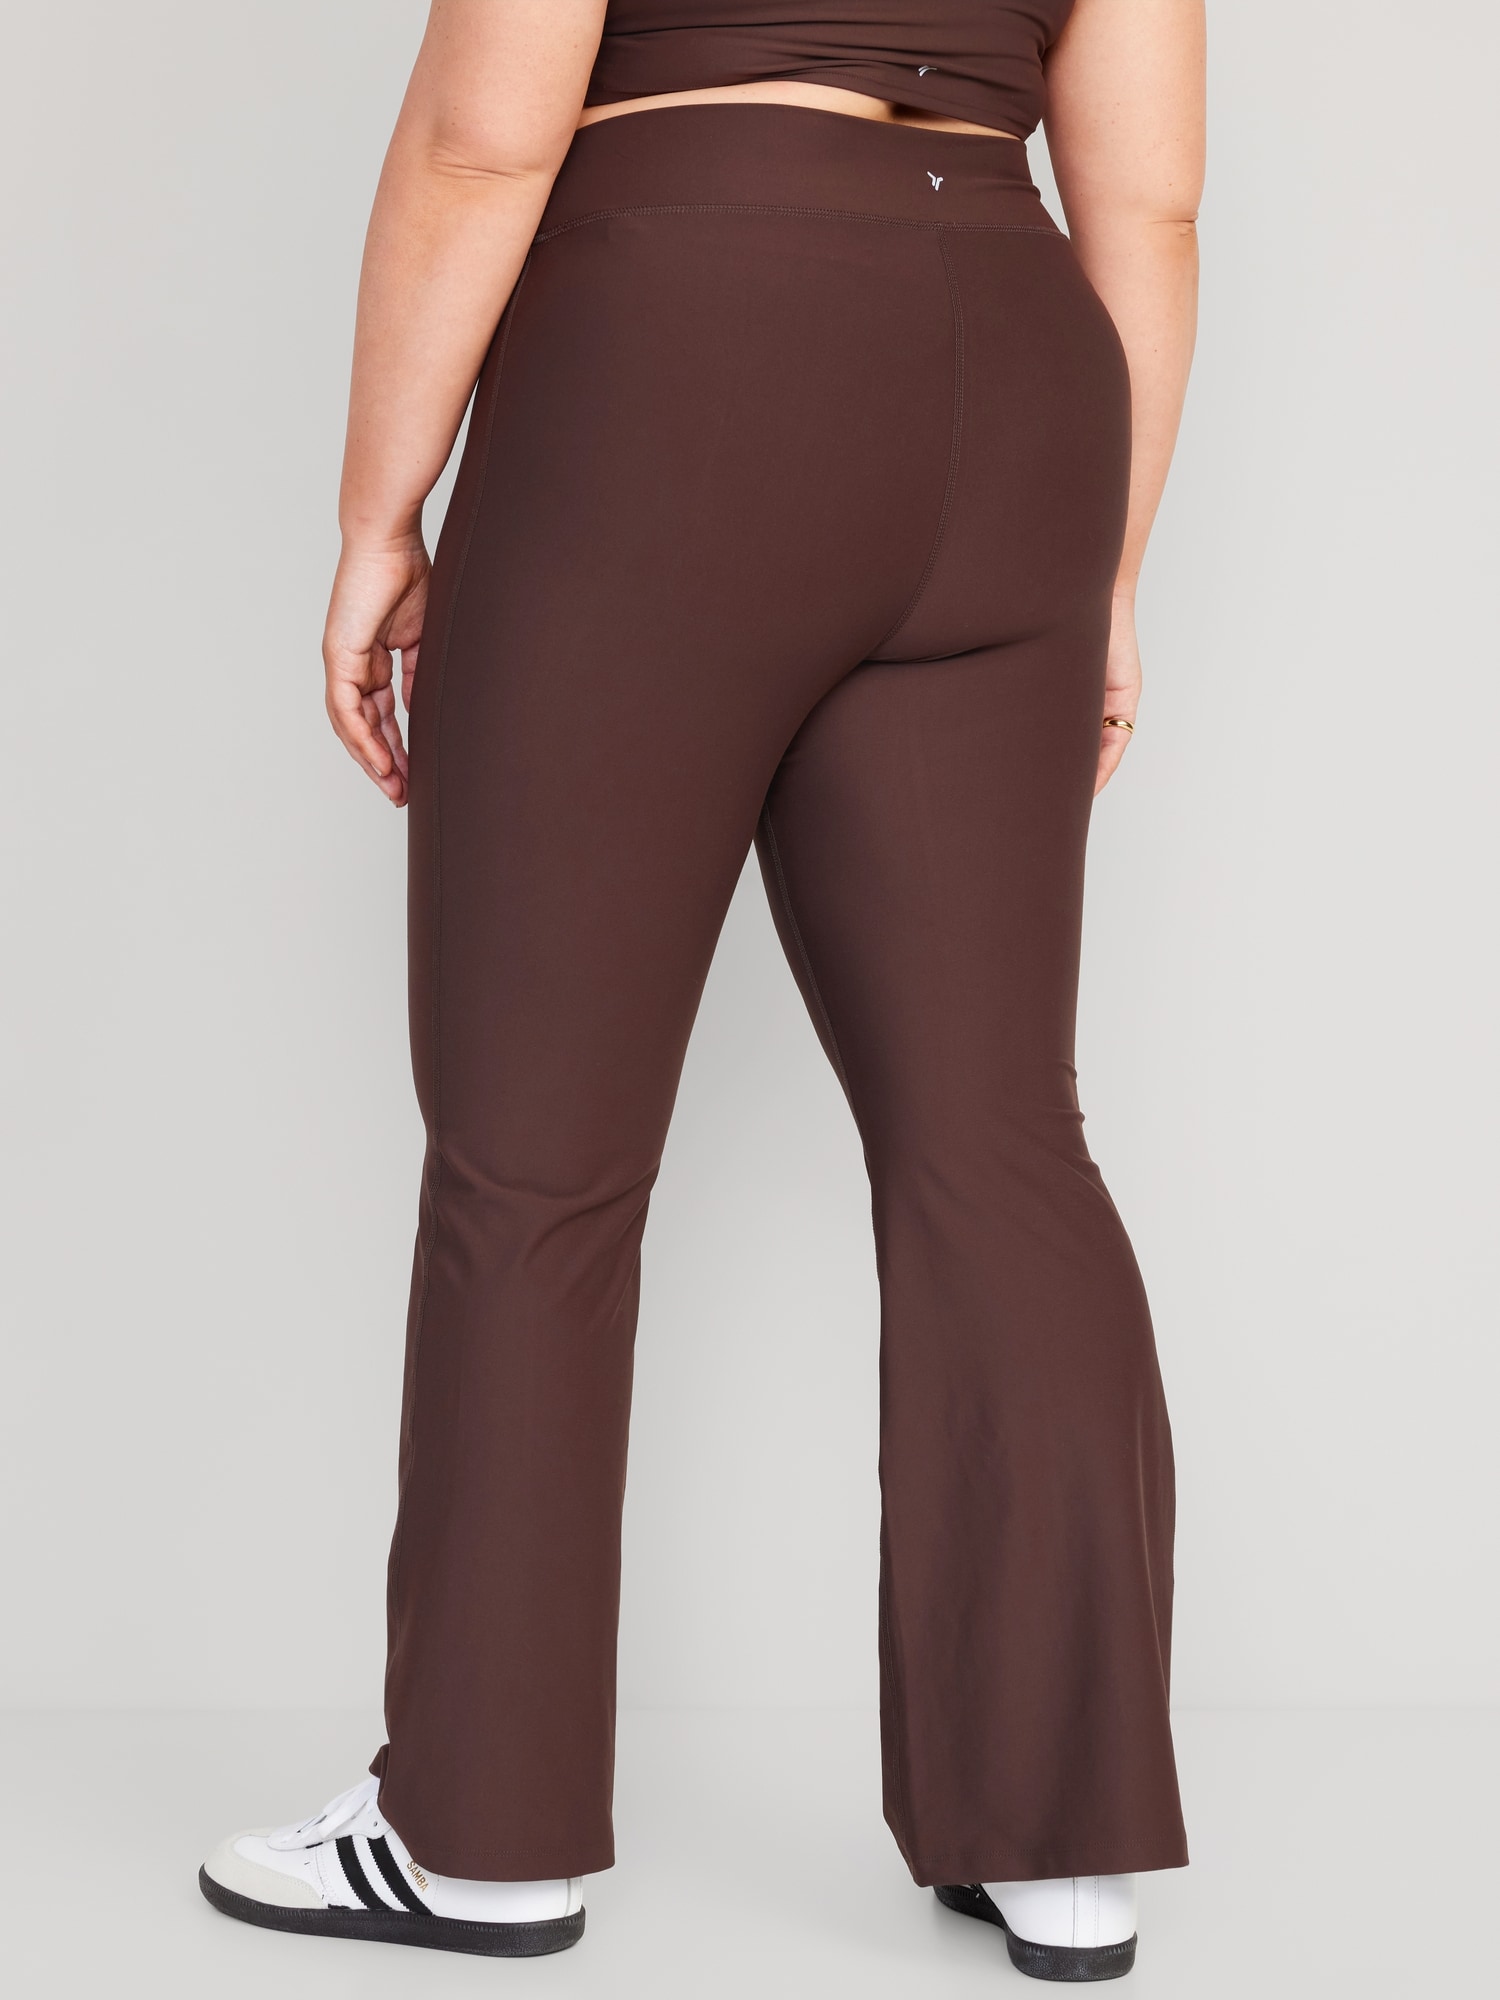 Old Navy - Extra High-Waisted PowerSoft Flare Leggings for Women brown